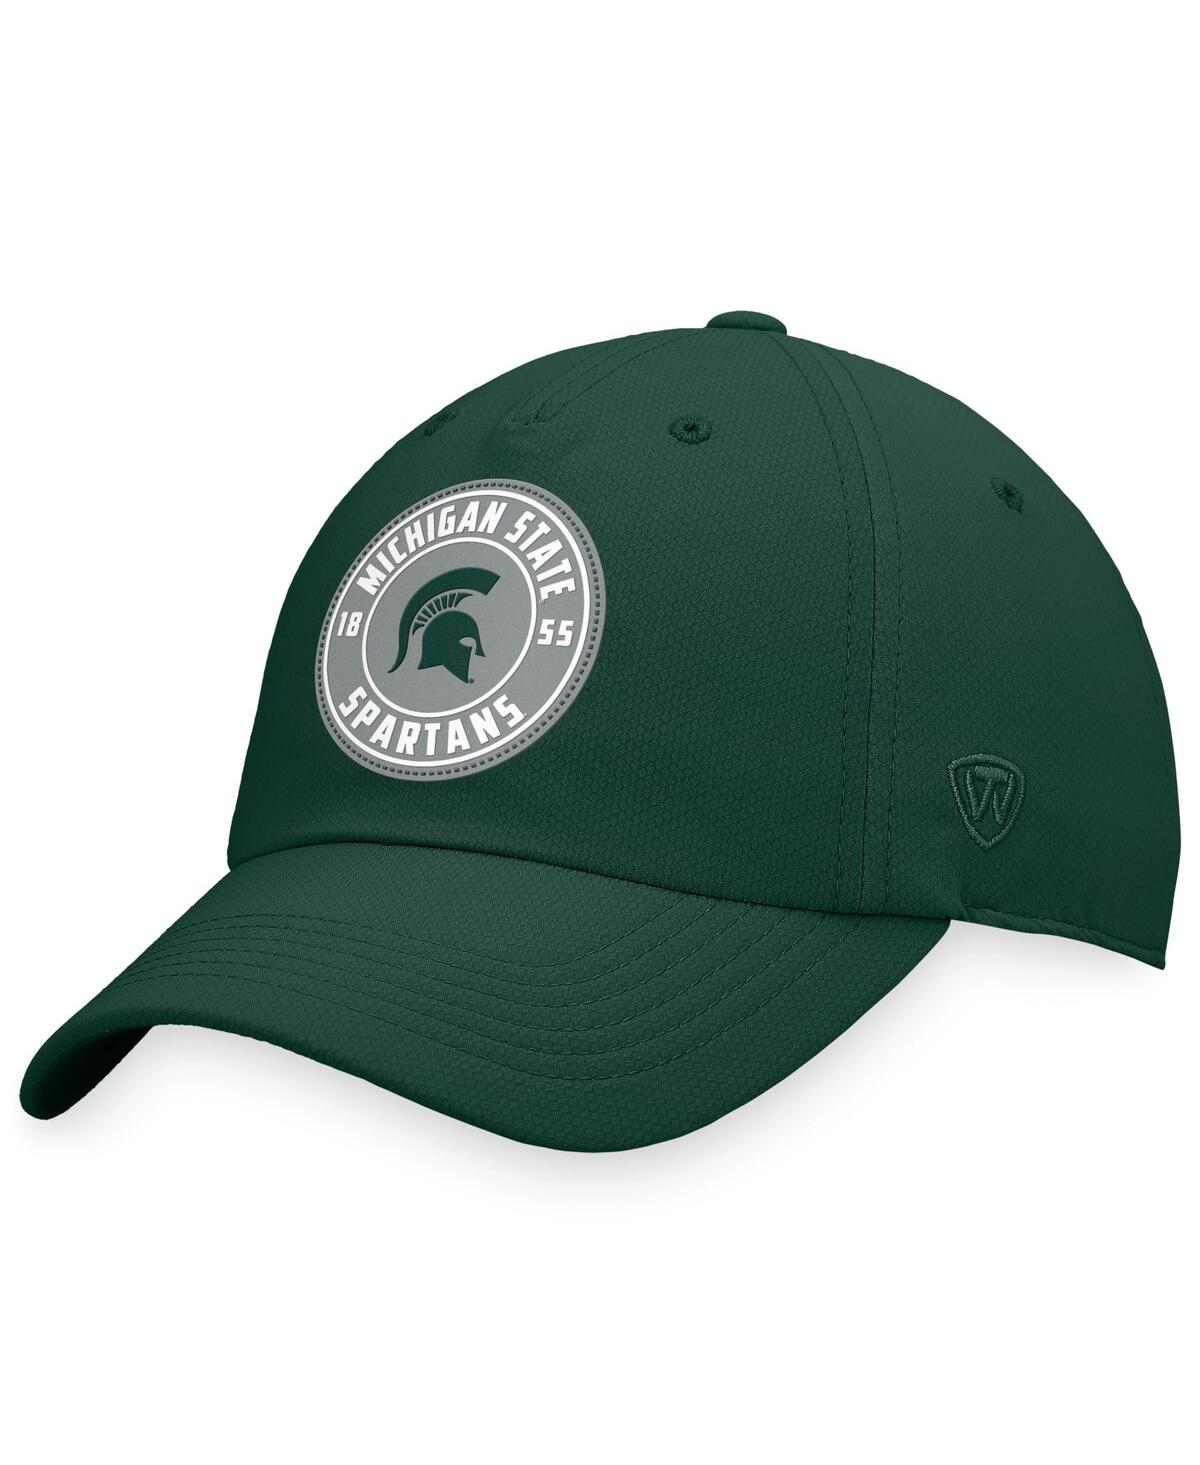 Men's Top of the World Green Michigan State Spartans Region Adjustable Hat - Green